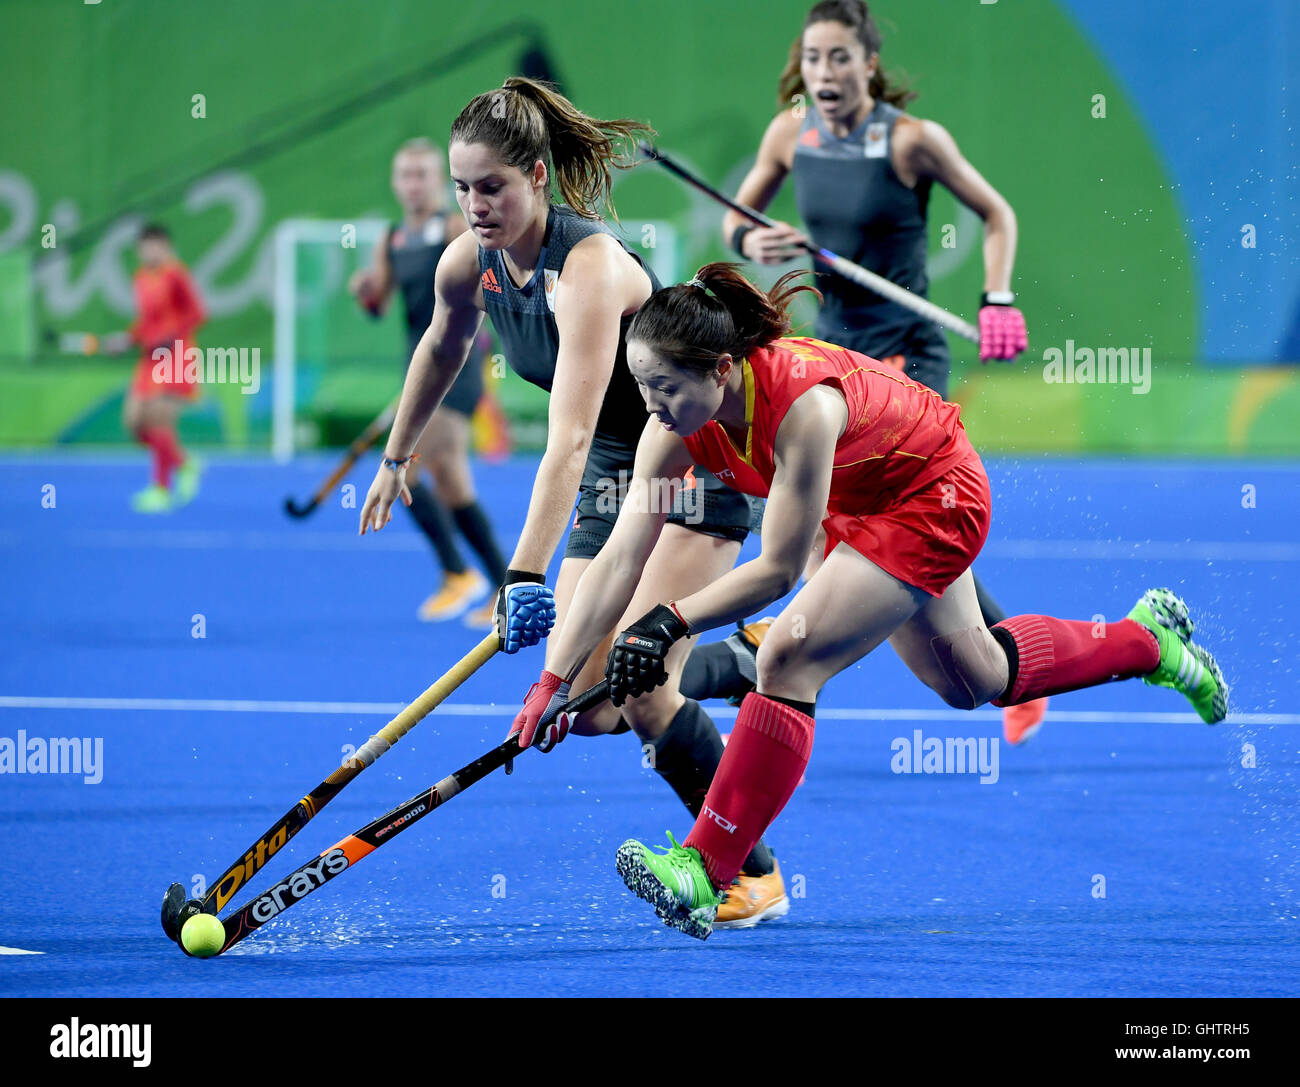 Rio De Janeiro, Brazil. 10th Aug, 2016. Peng Yang (R) of China competes during the women's hockey pool A match between China and Netherlands at the 2016 Rio Olympic Games in Rio de Janeiro, Brazil, on Aug. 10, 2016. Netherlands won China with 1:0. Credit:  Wang Yuguo/Xinhua/Alamy Live News Stock Photo